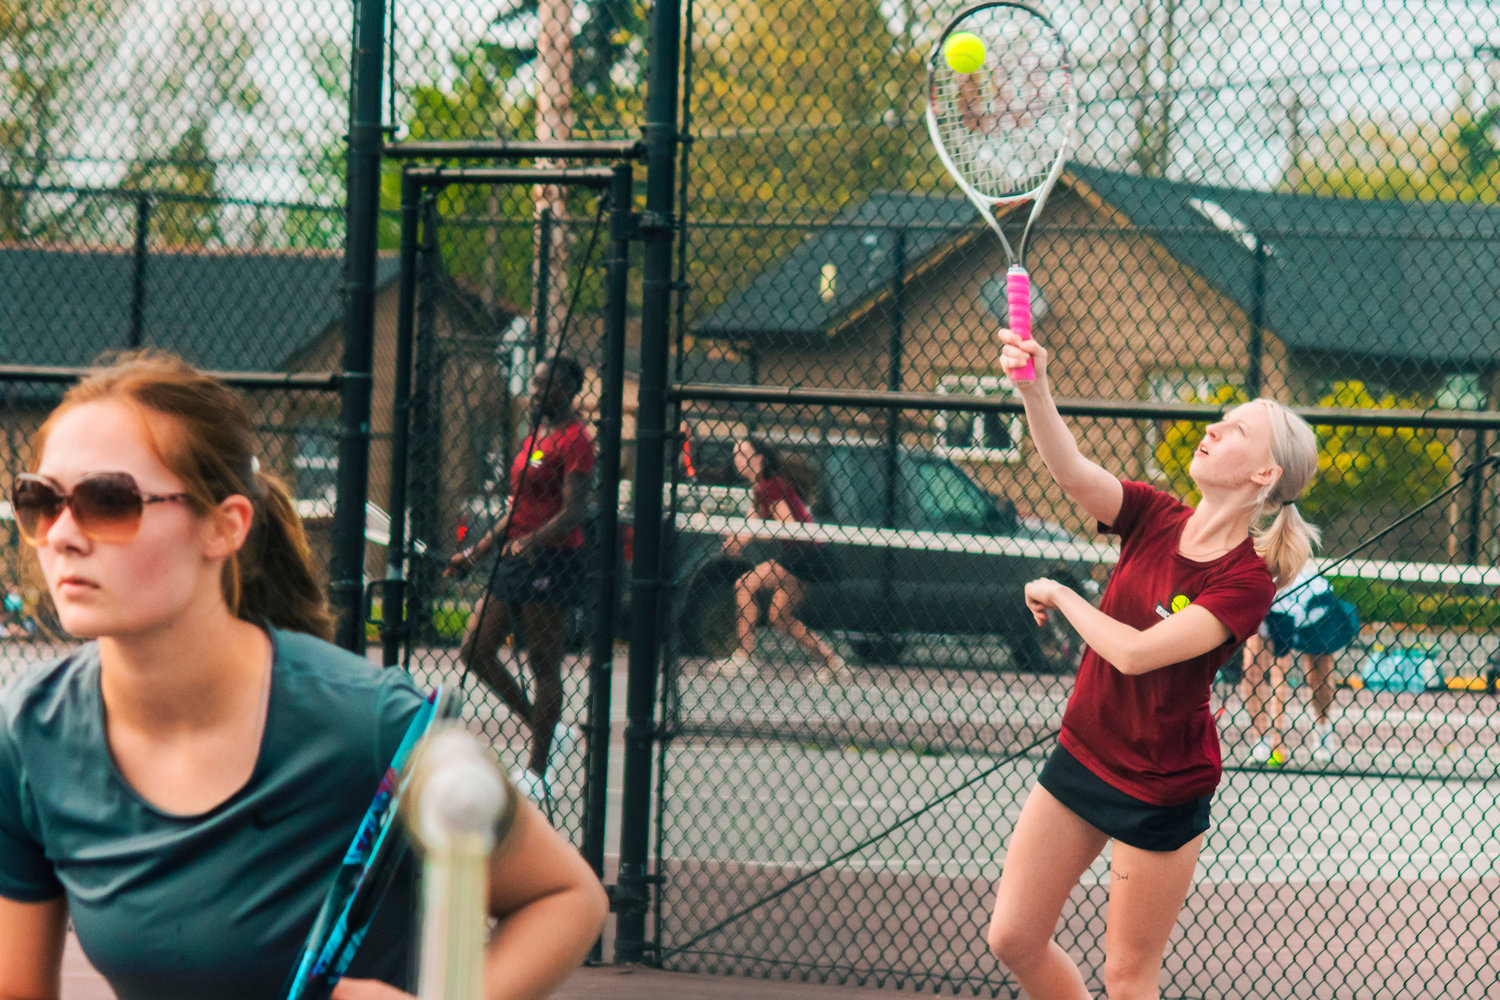 Bearcat tennis courts are seen in full swing as girls play matches earlier this year.